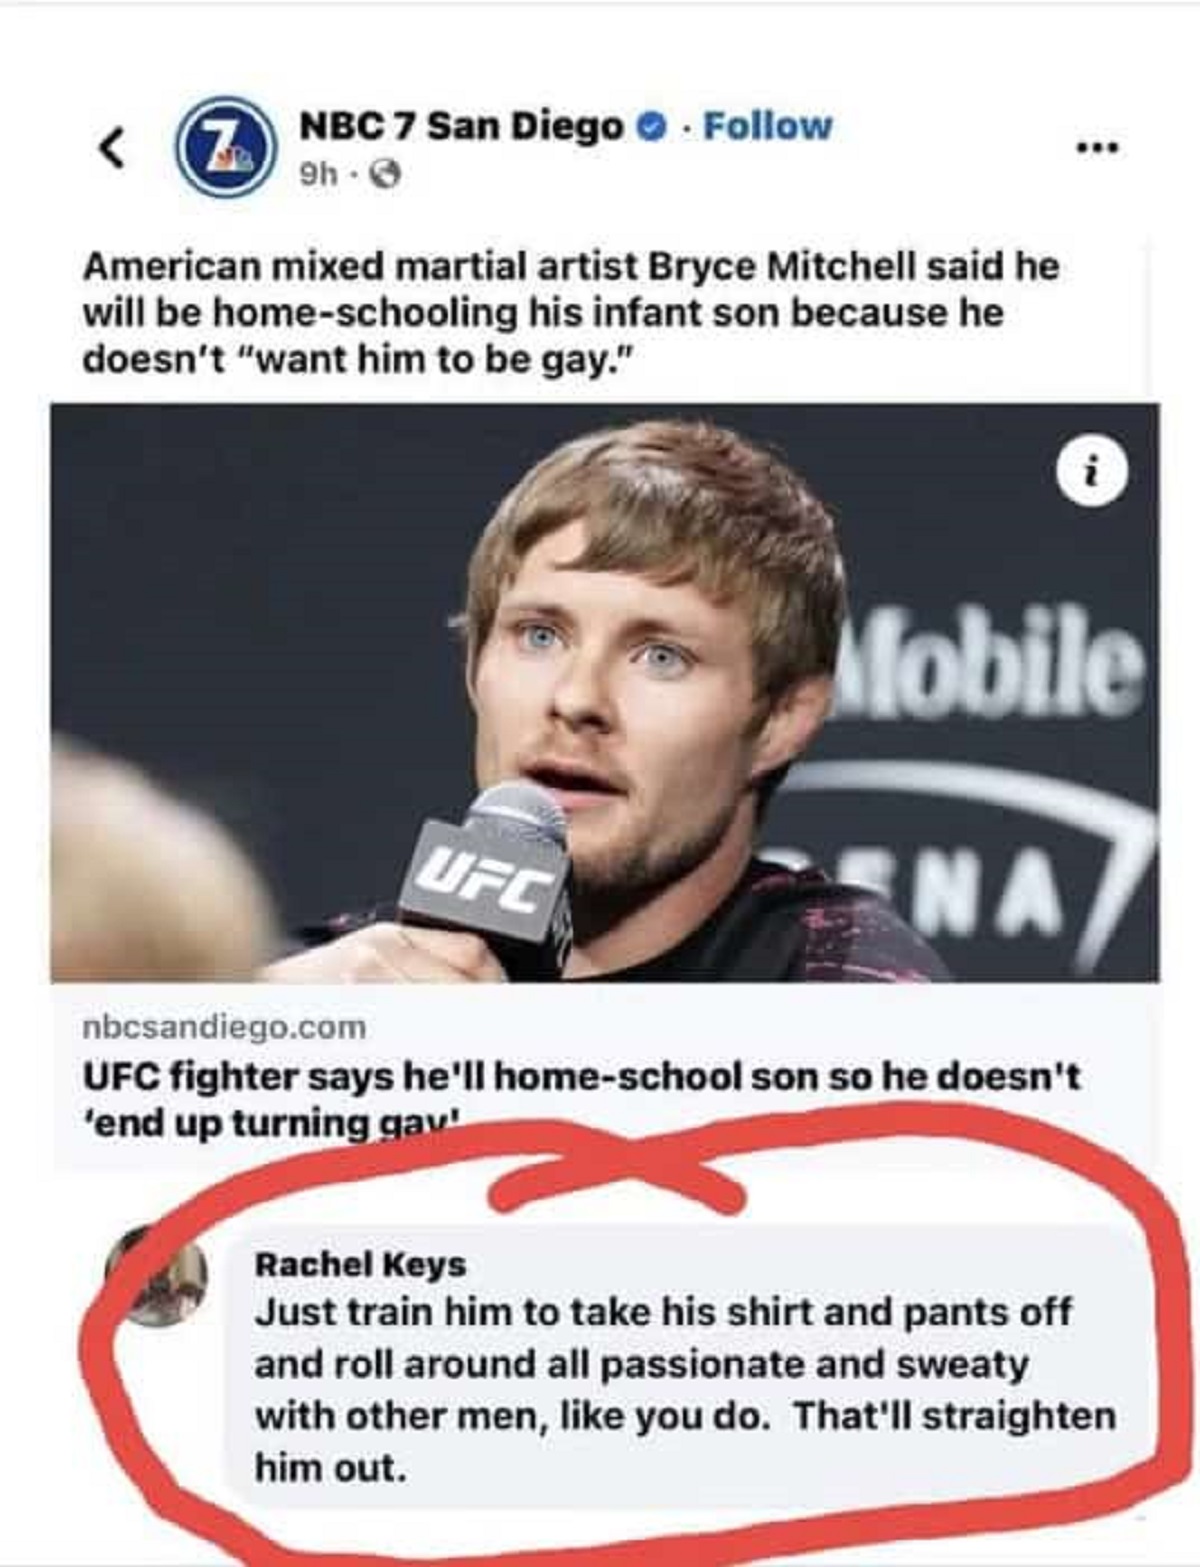 Bryce Mitchell - 7 Nbc 7 San Diego 9h American mixed martial artist Bryce Mitchell said he will be homeschooling his infant son because he doesn't "want him to be gay." 'N Mobile nbcsandiego.com Ufc Na Ufc fighter says he'll homeschool son so he doesn't '